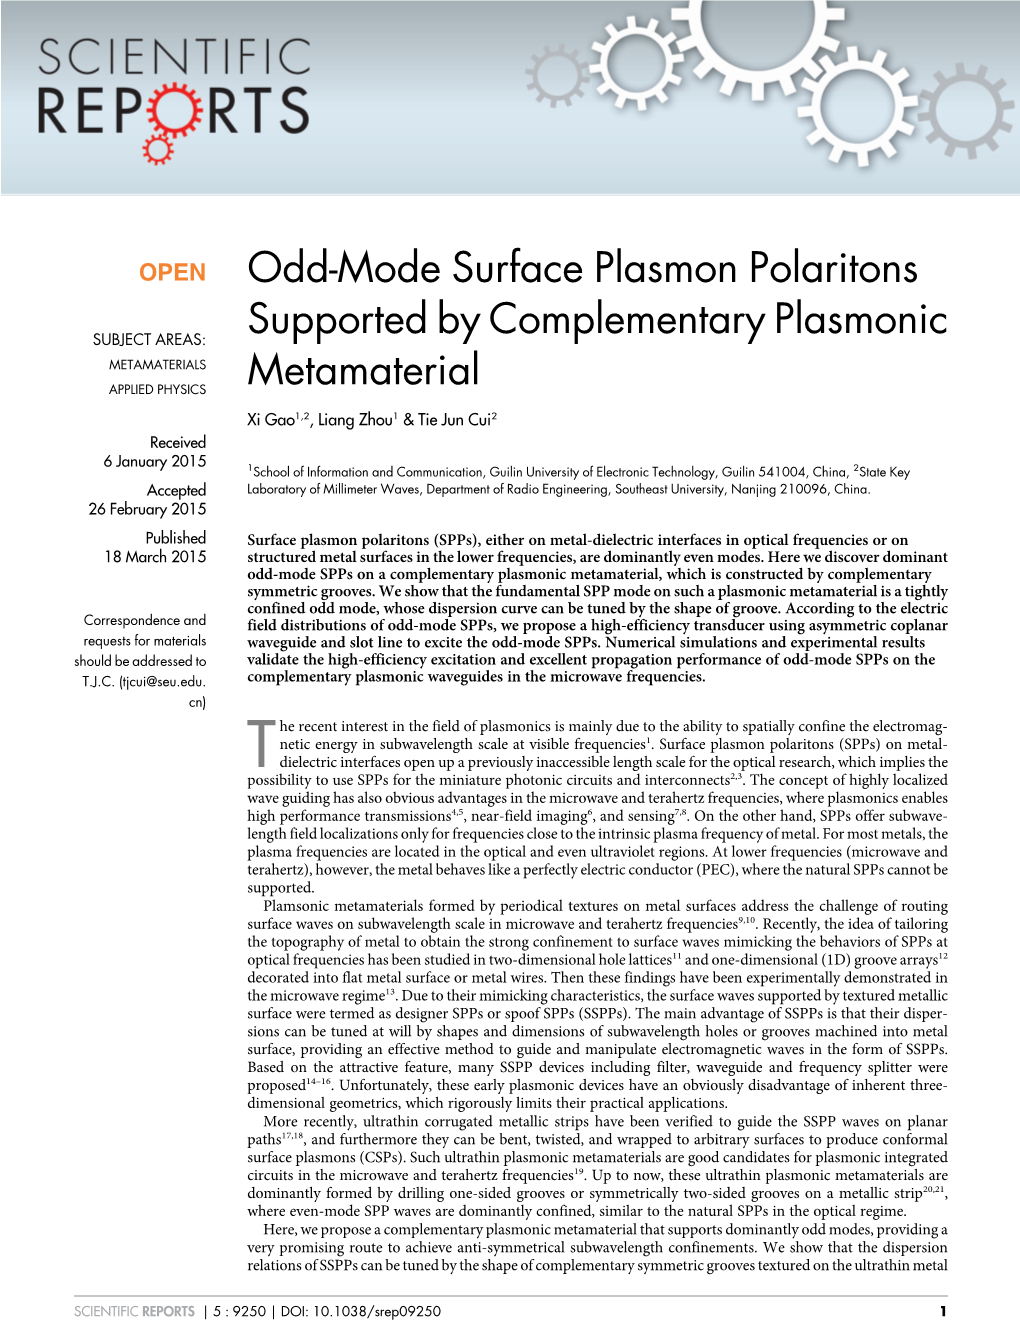 Odd-Mode Surface Plasmon Polaritons Supported By